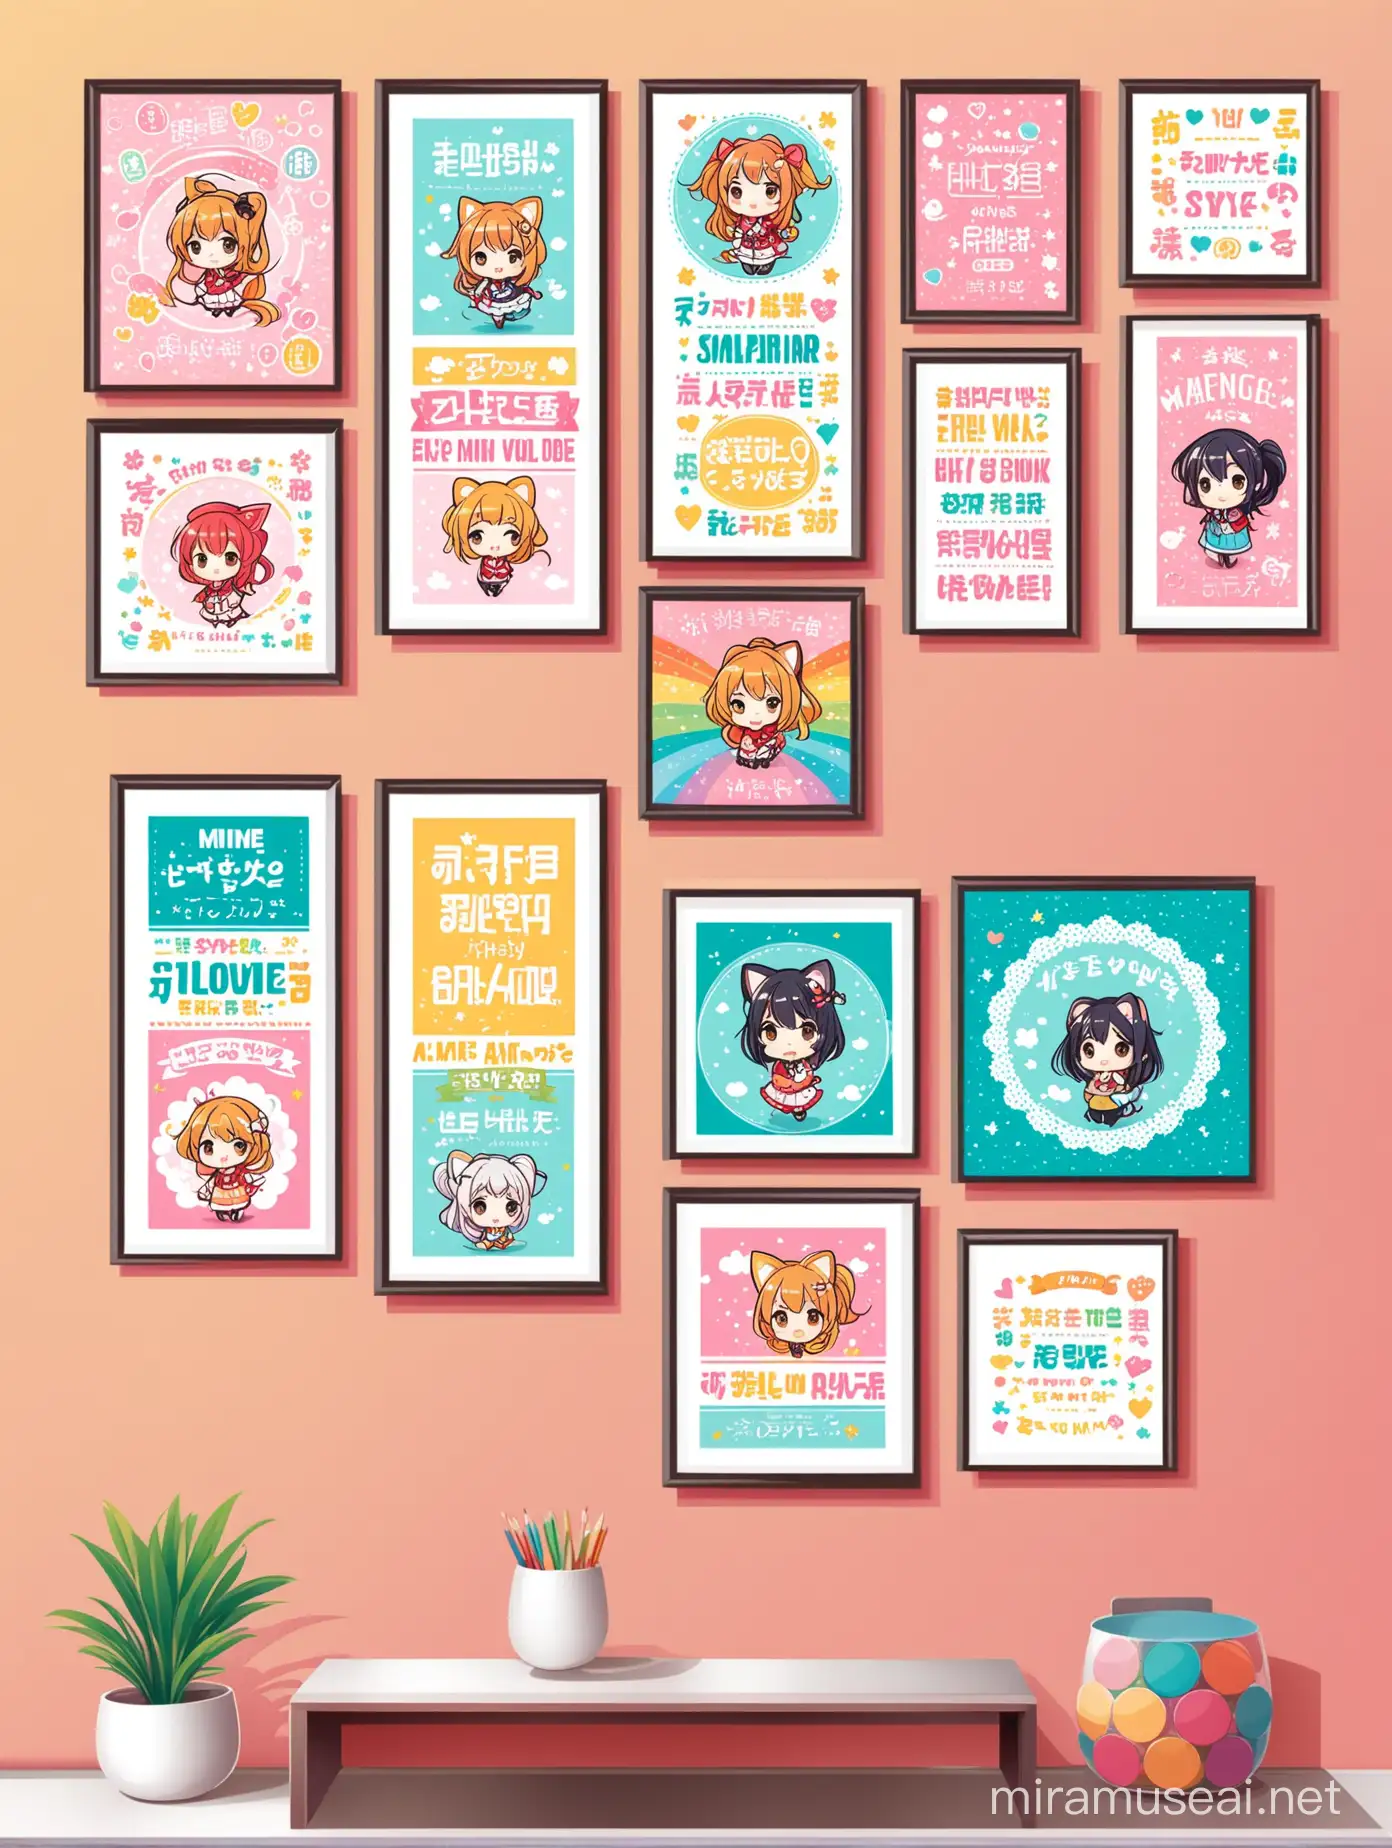 Colorful Anime Style Wall Art Frames with Cute Typography and Quotes